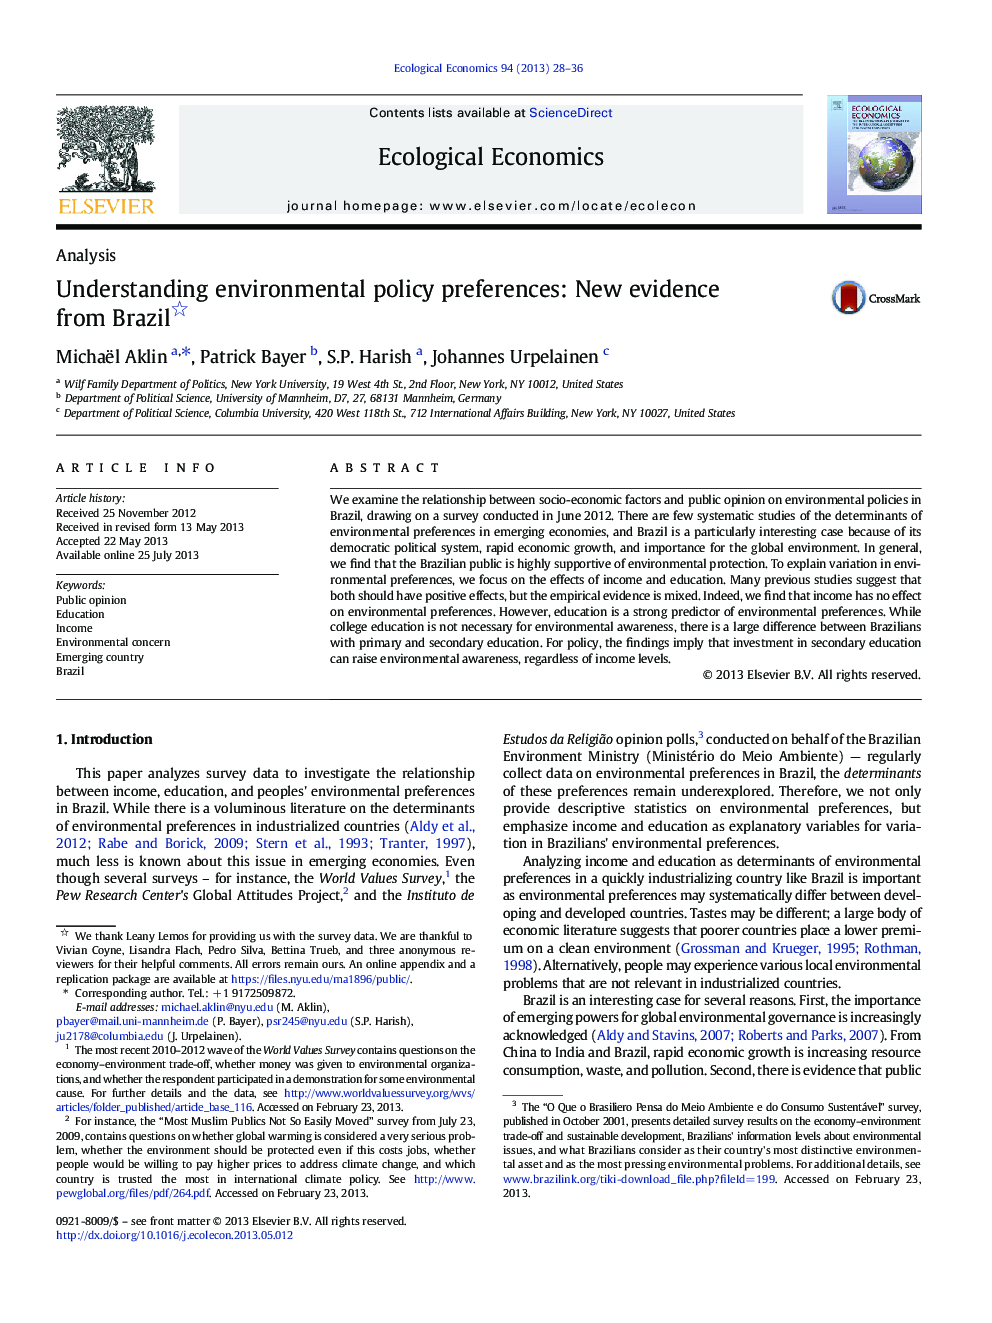 Understanding environmental policy preferences: New evidence from Brazil